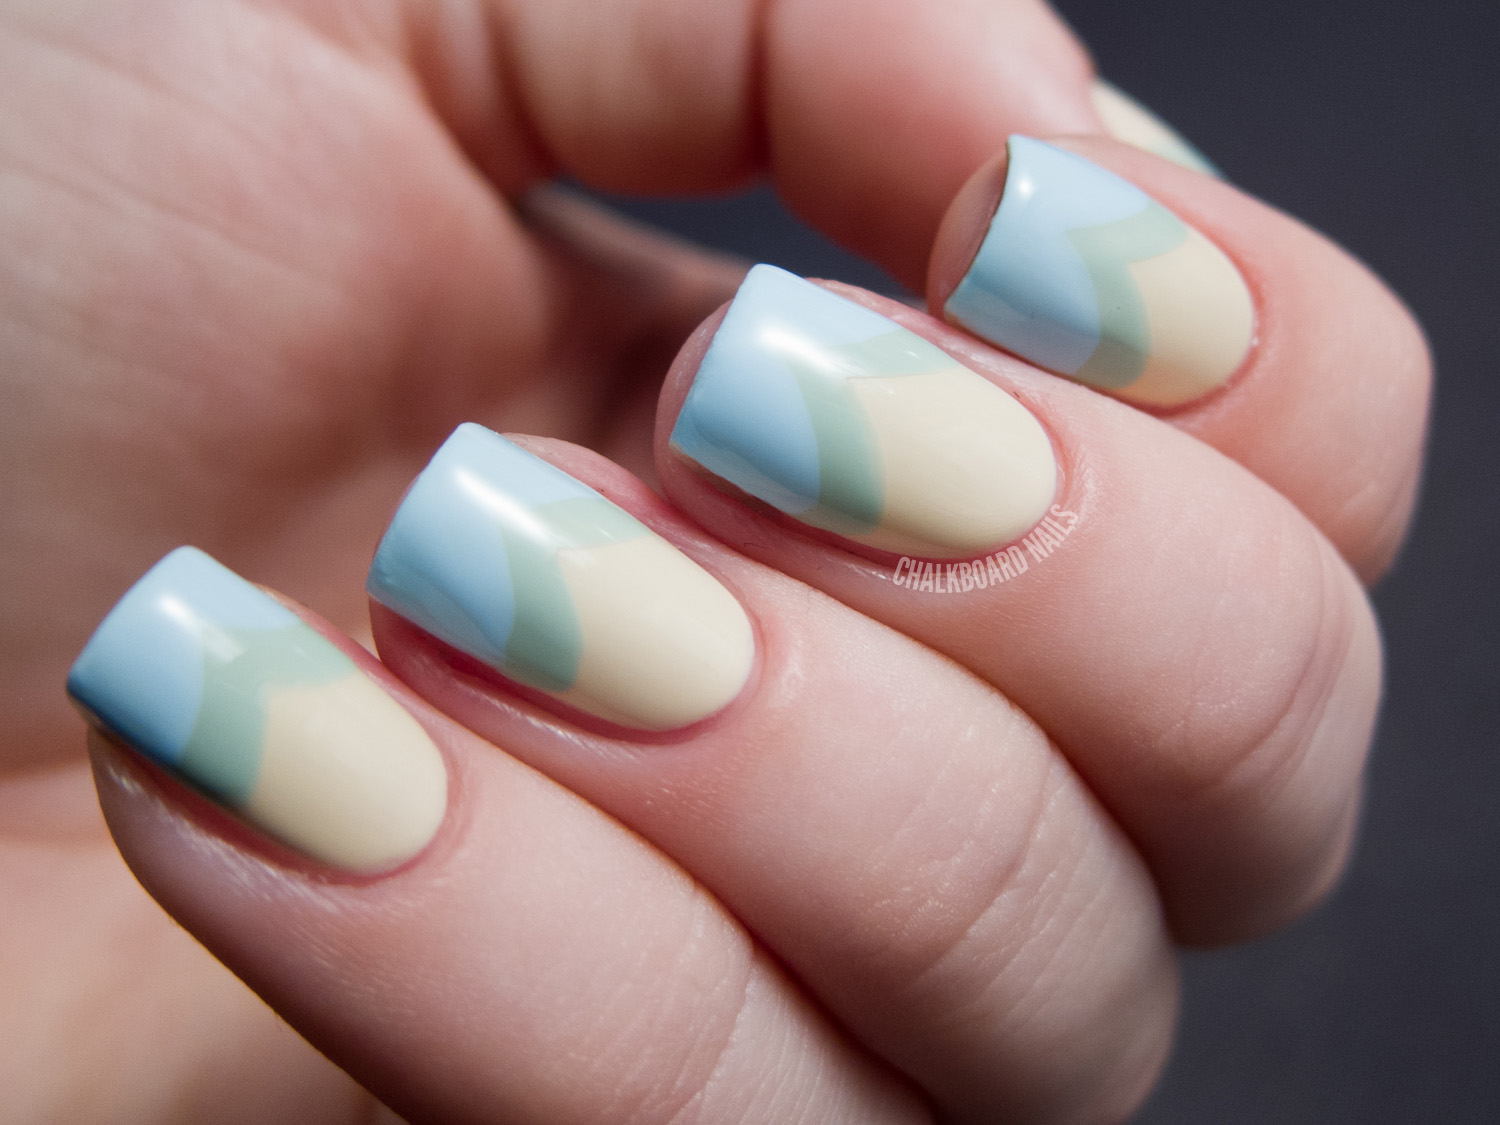 White and Pastel Nail Art Designs for a Soft and Pretty Look - wide 5